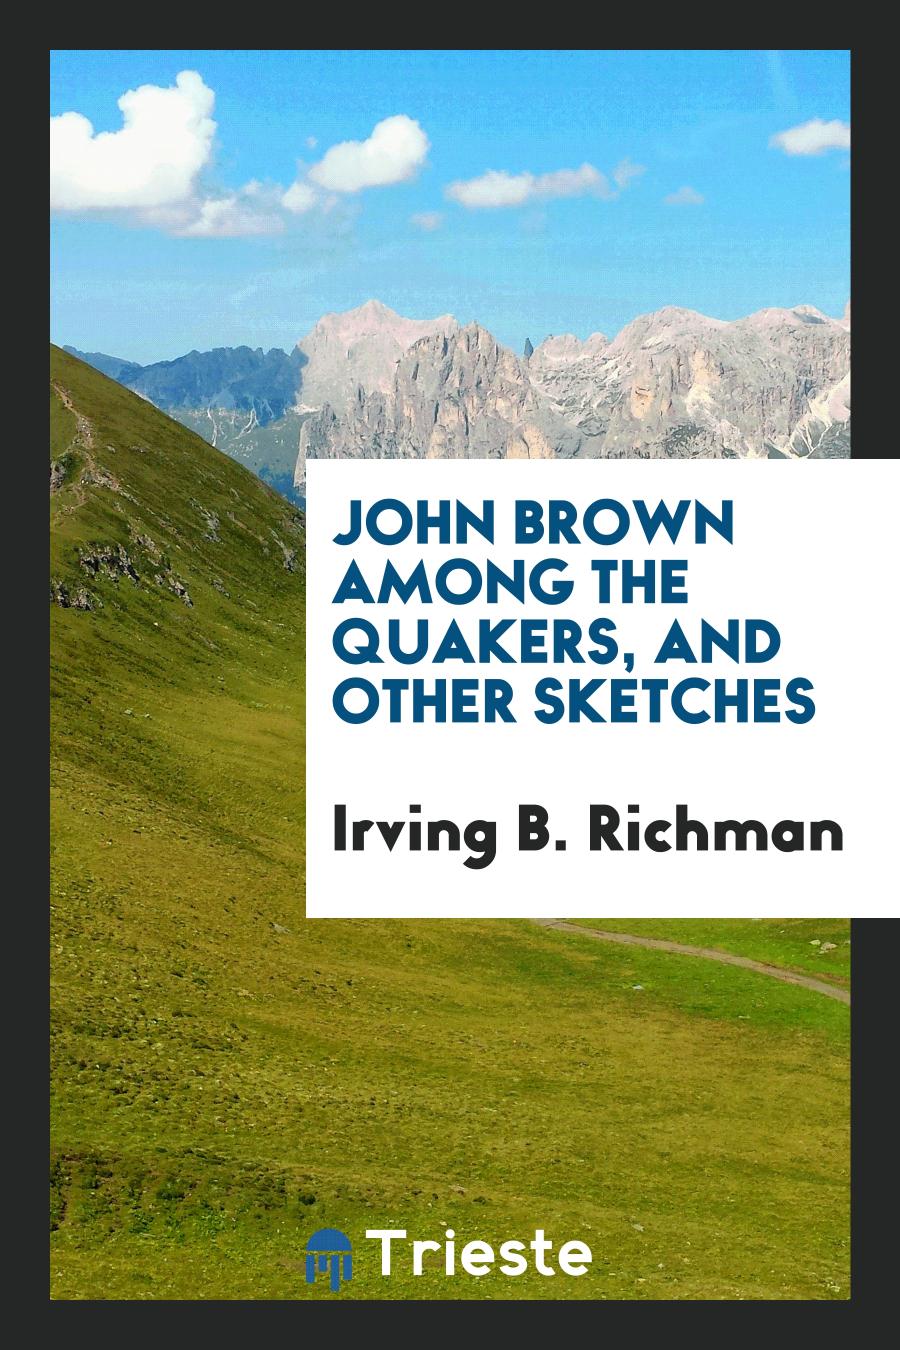 John Brown among the Quakers, and other sketches